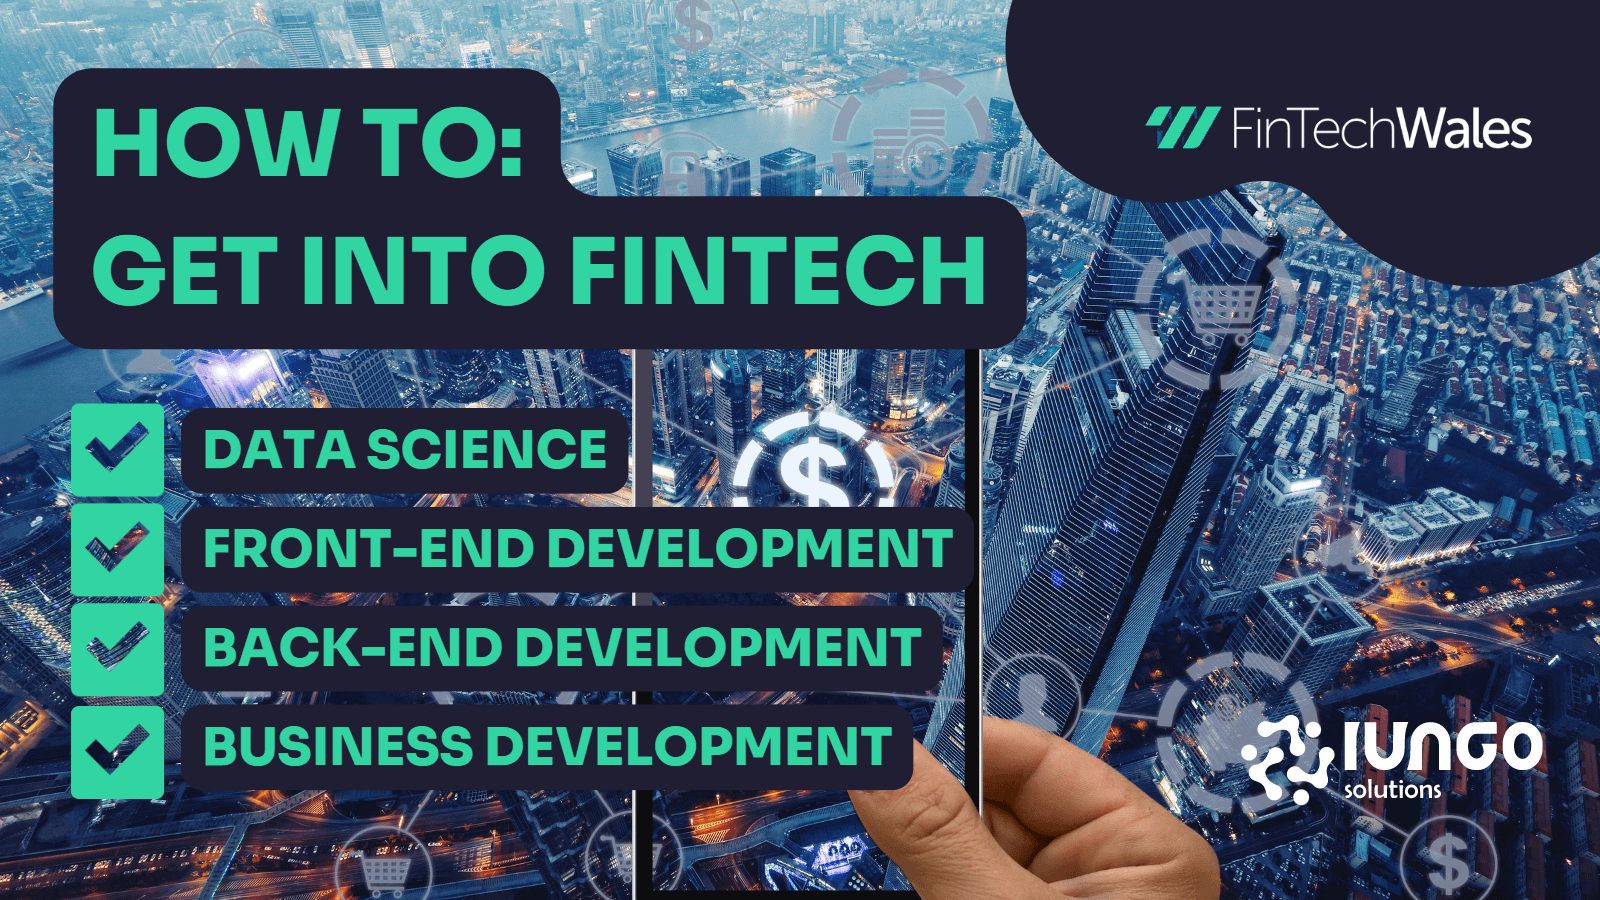 How to: Get into FinTech